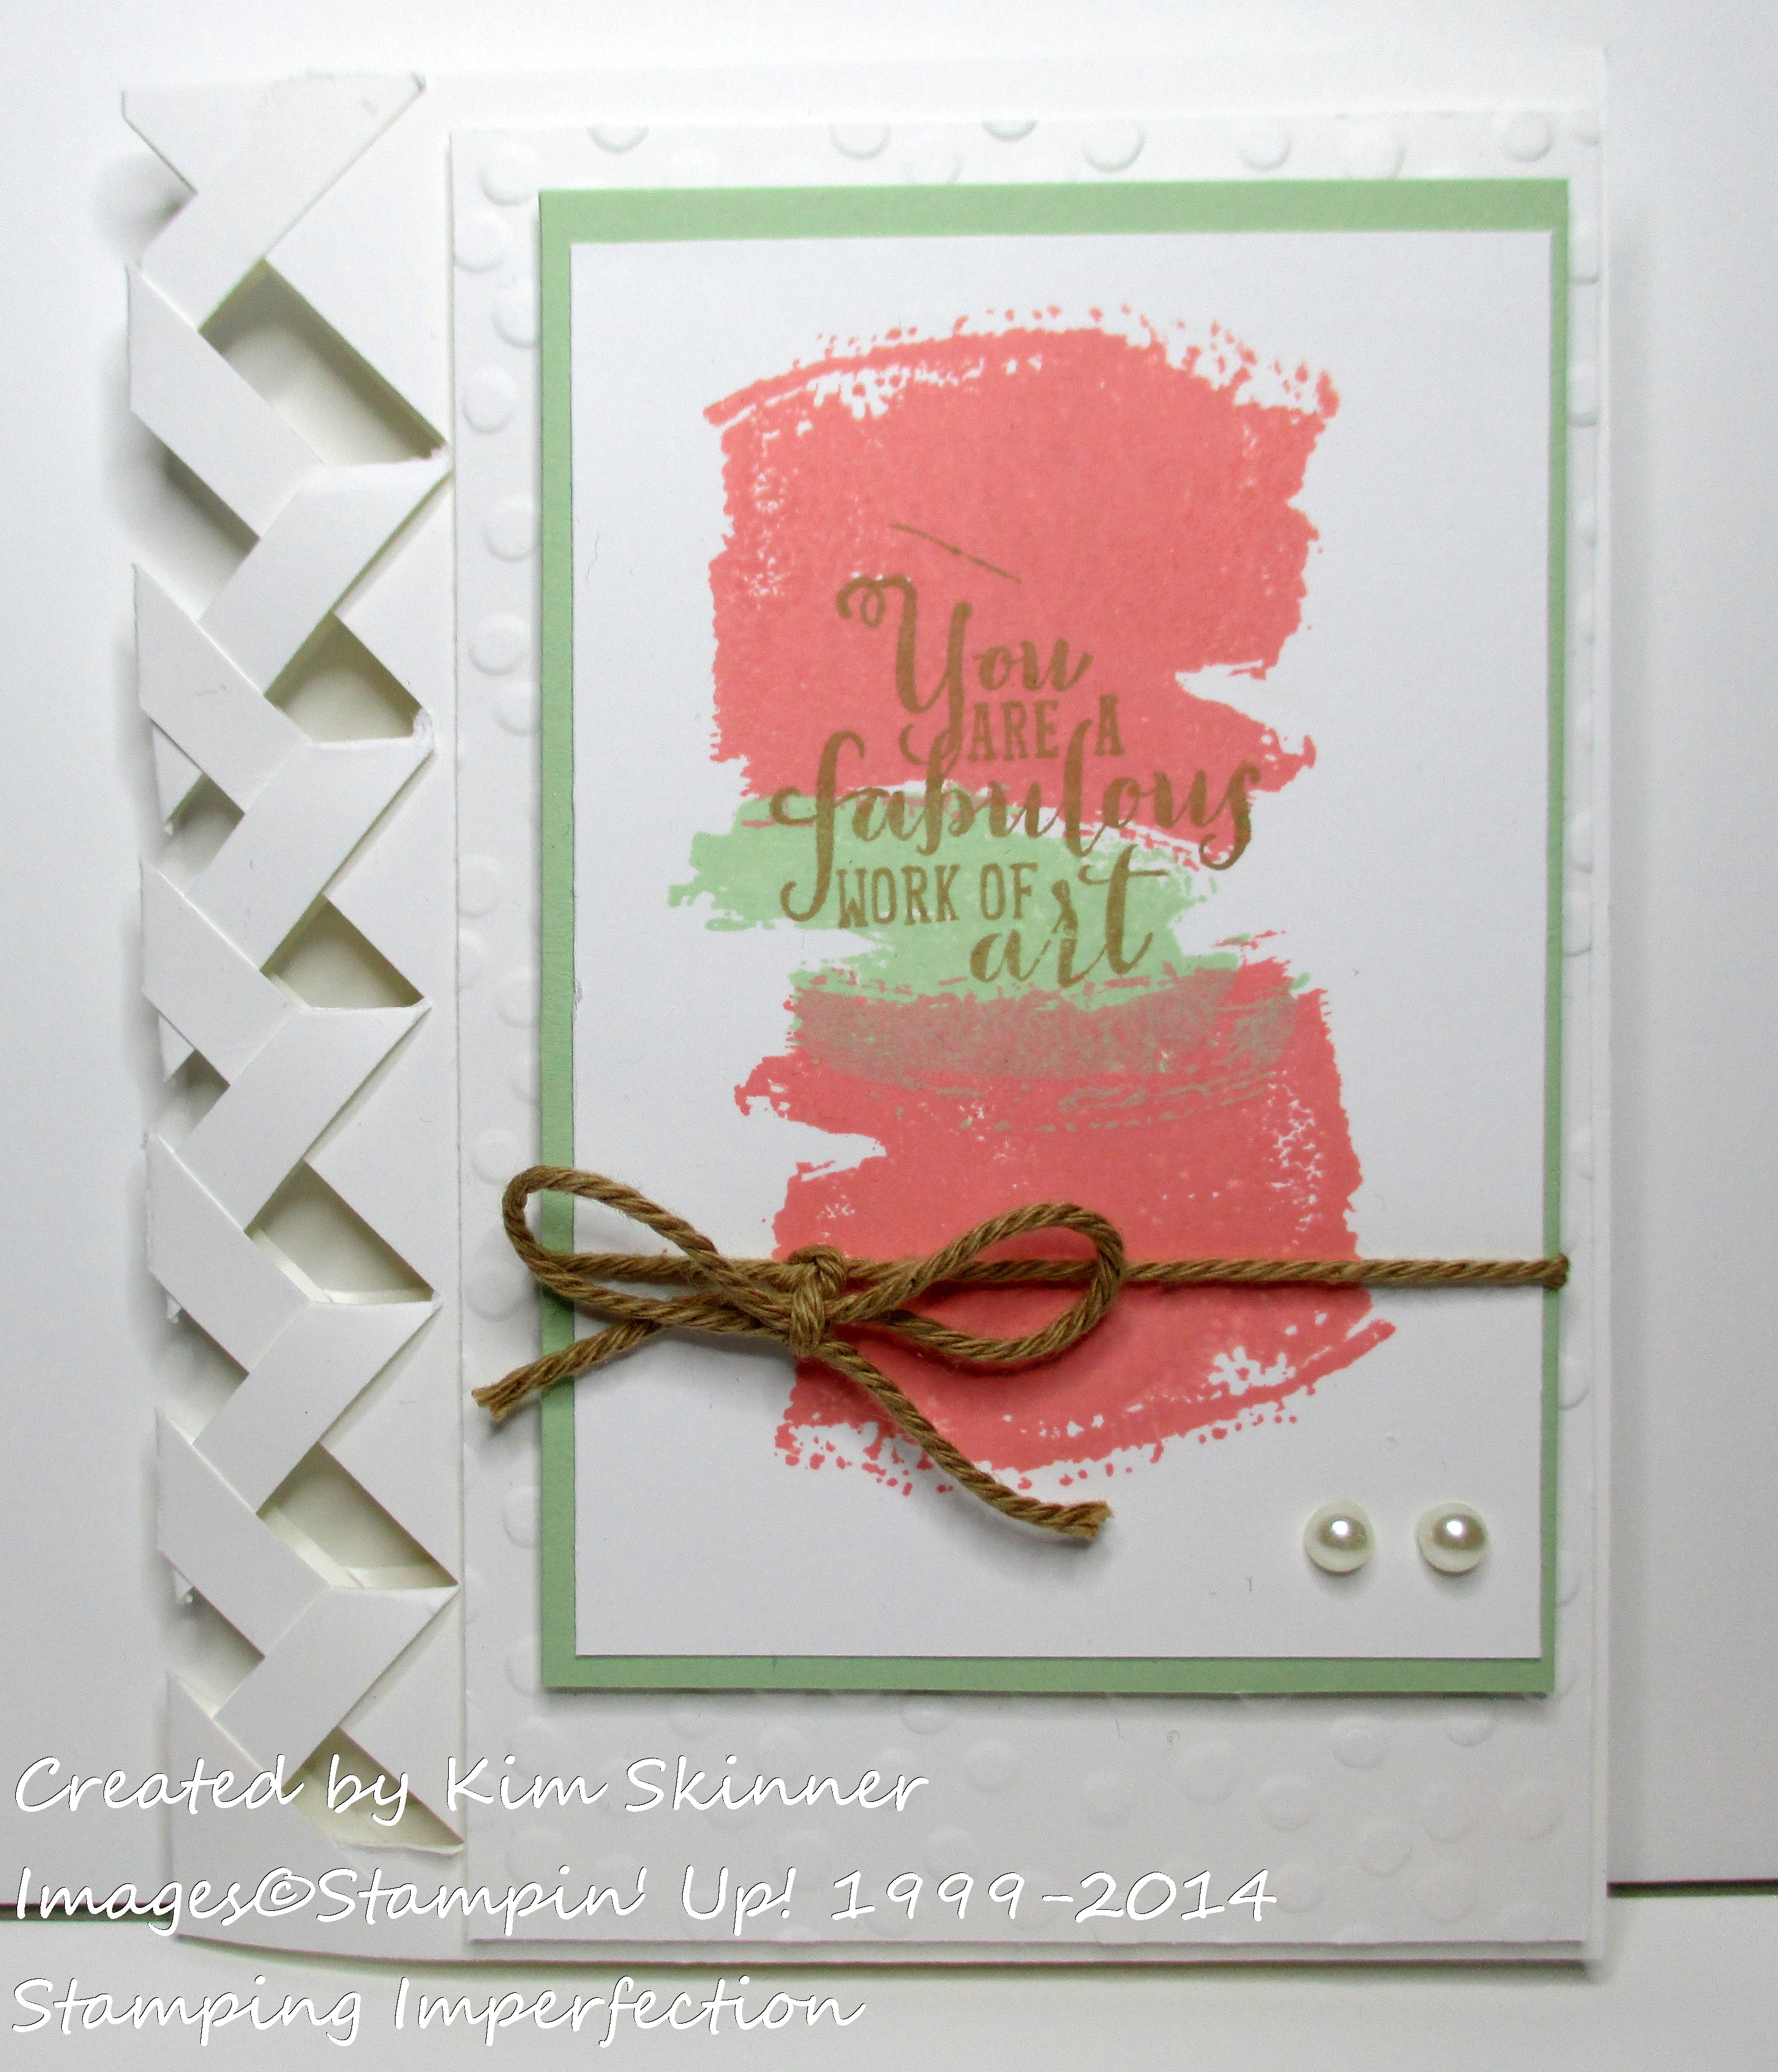 stamping imperfection braided card + template